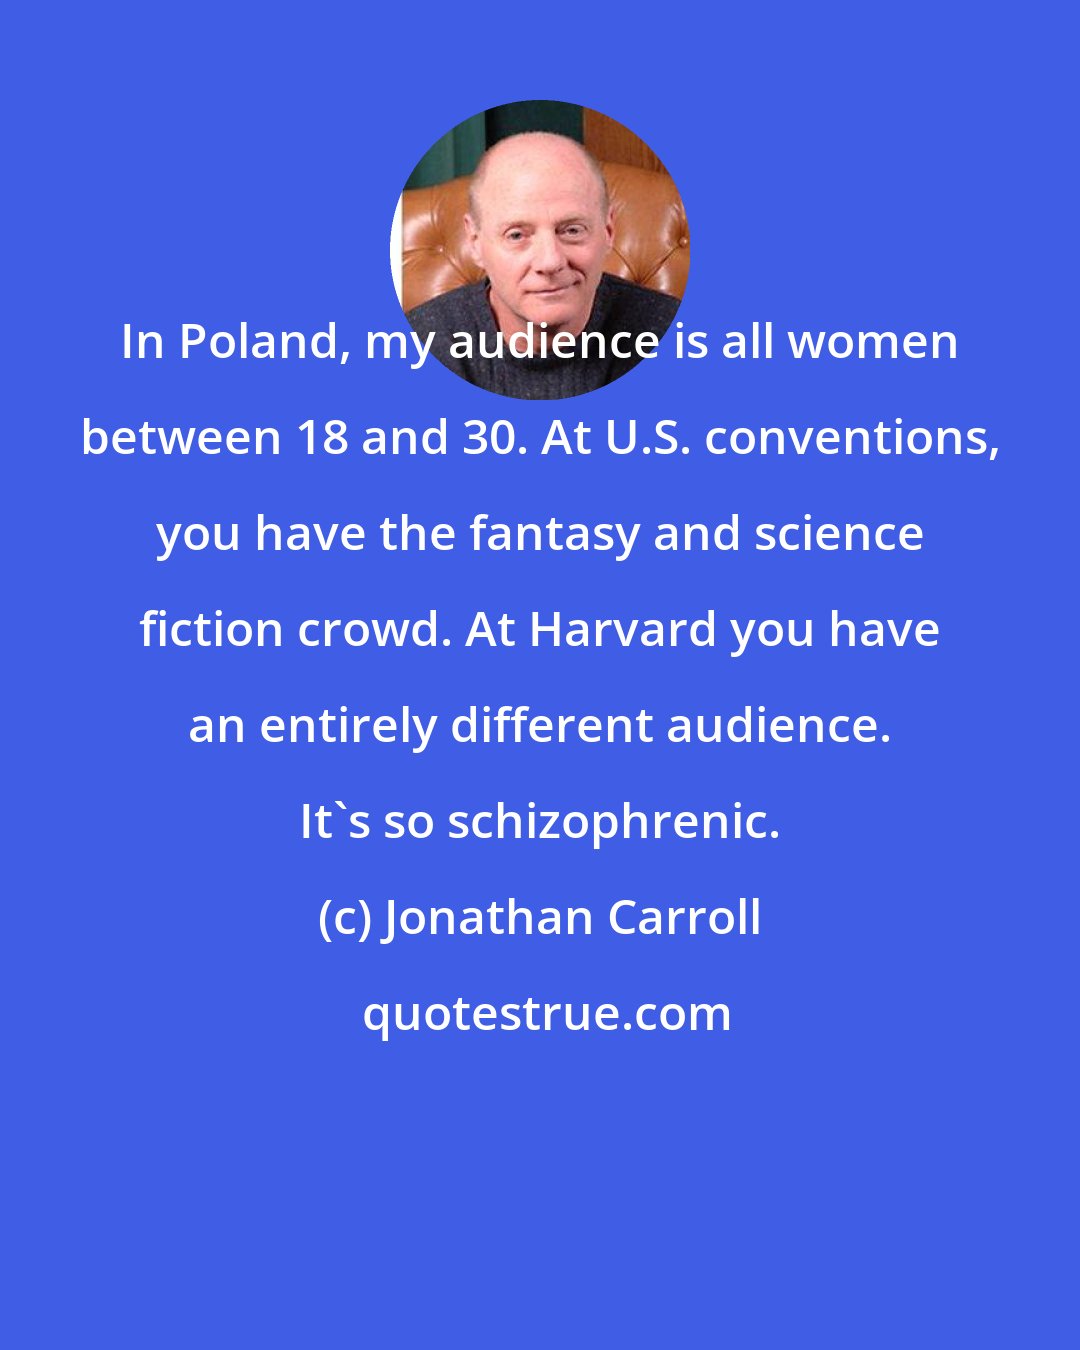 Jonathan Carroll: In Poland, my audience is all women between 18 and 30. At U.S. conventions, you have the fantasy and science fiction crowd. At Harvard you have an entirely different audience. It's so schizophrenic.